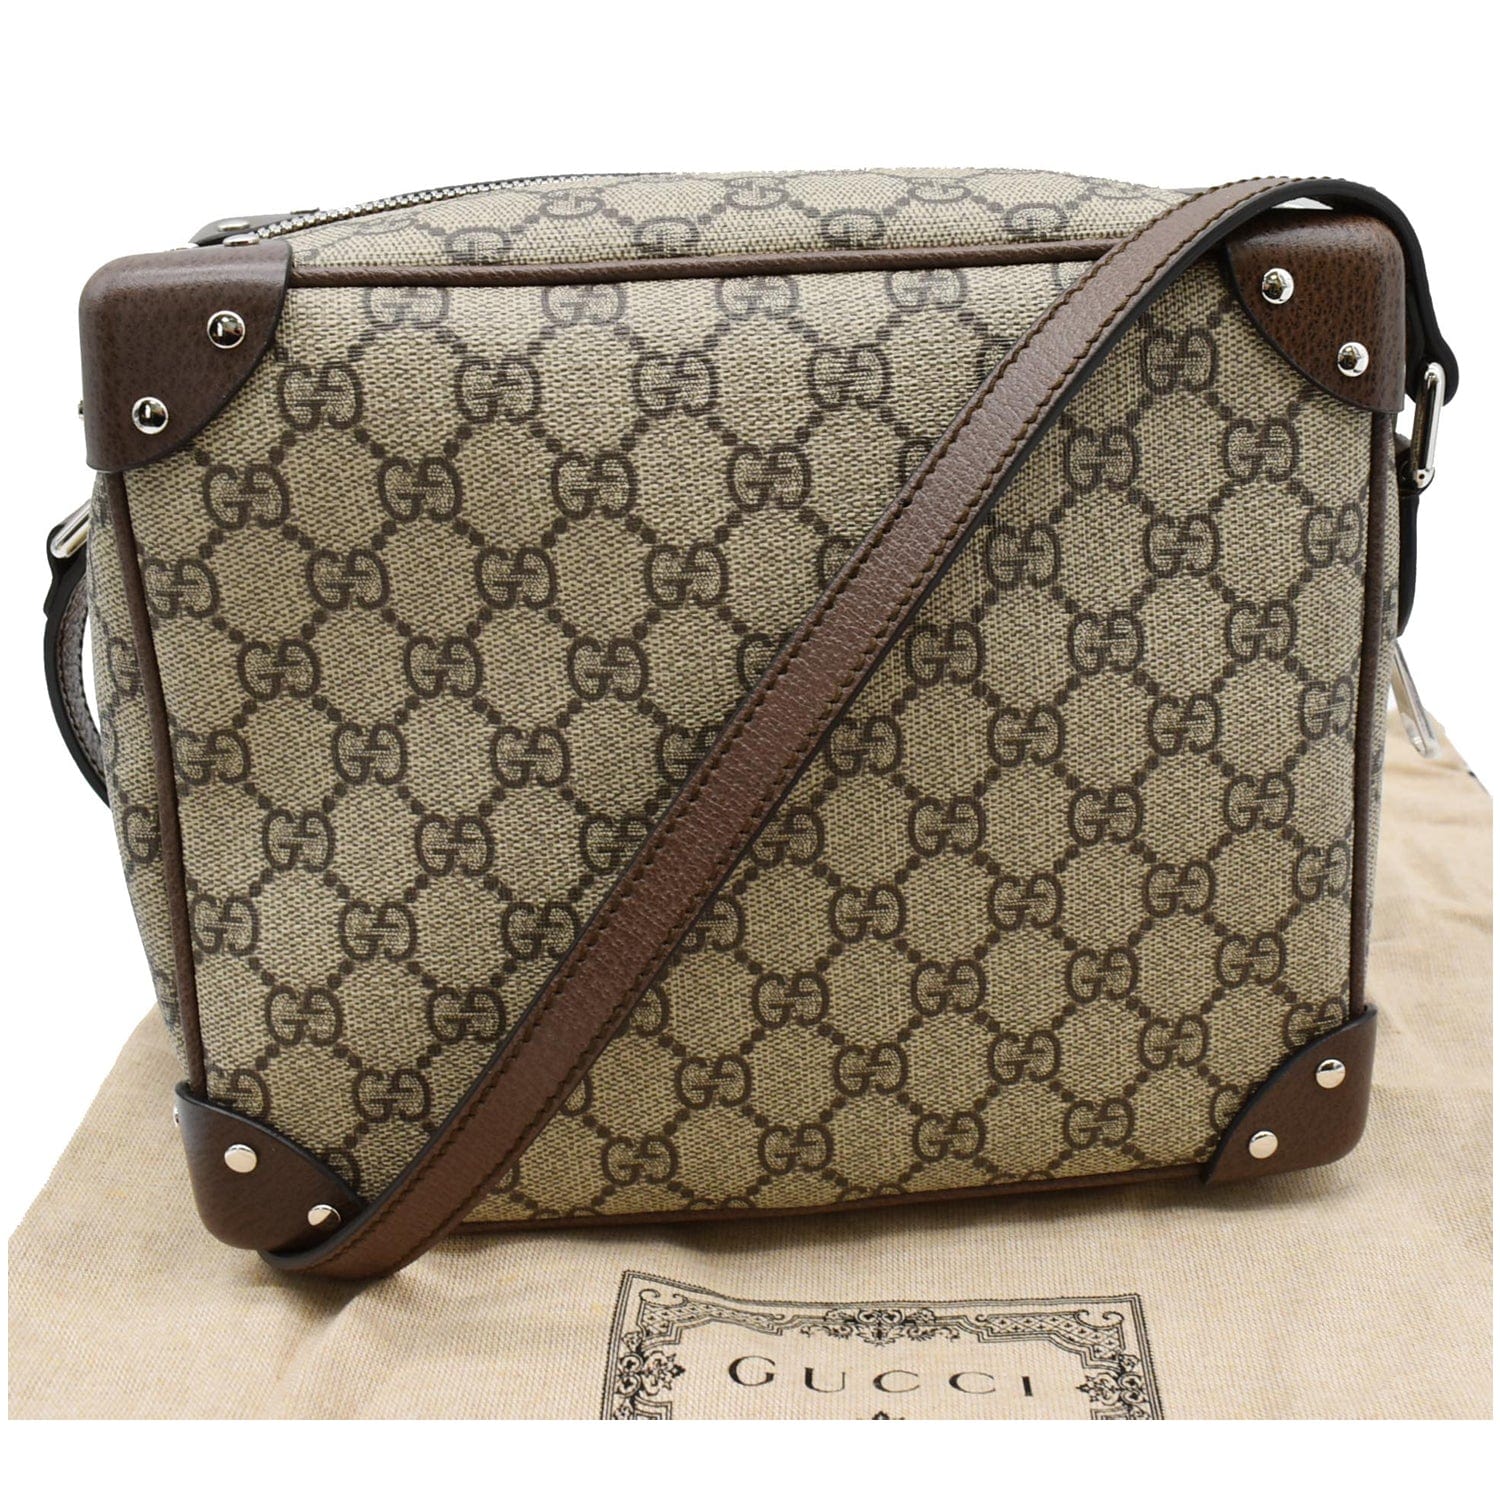 Gucci Beige/Brown GG Supreme Canvas and Leather Crossbody Bag